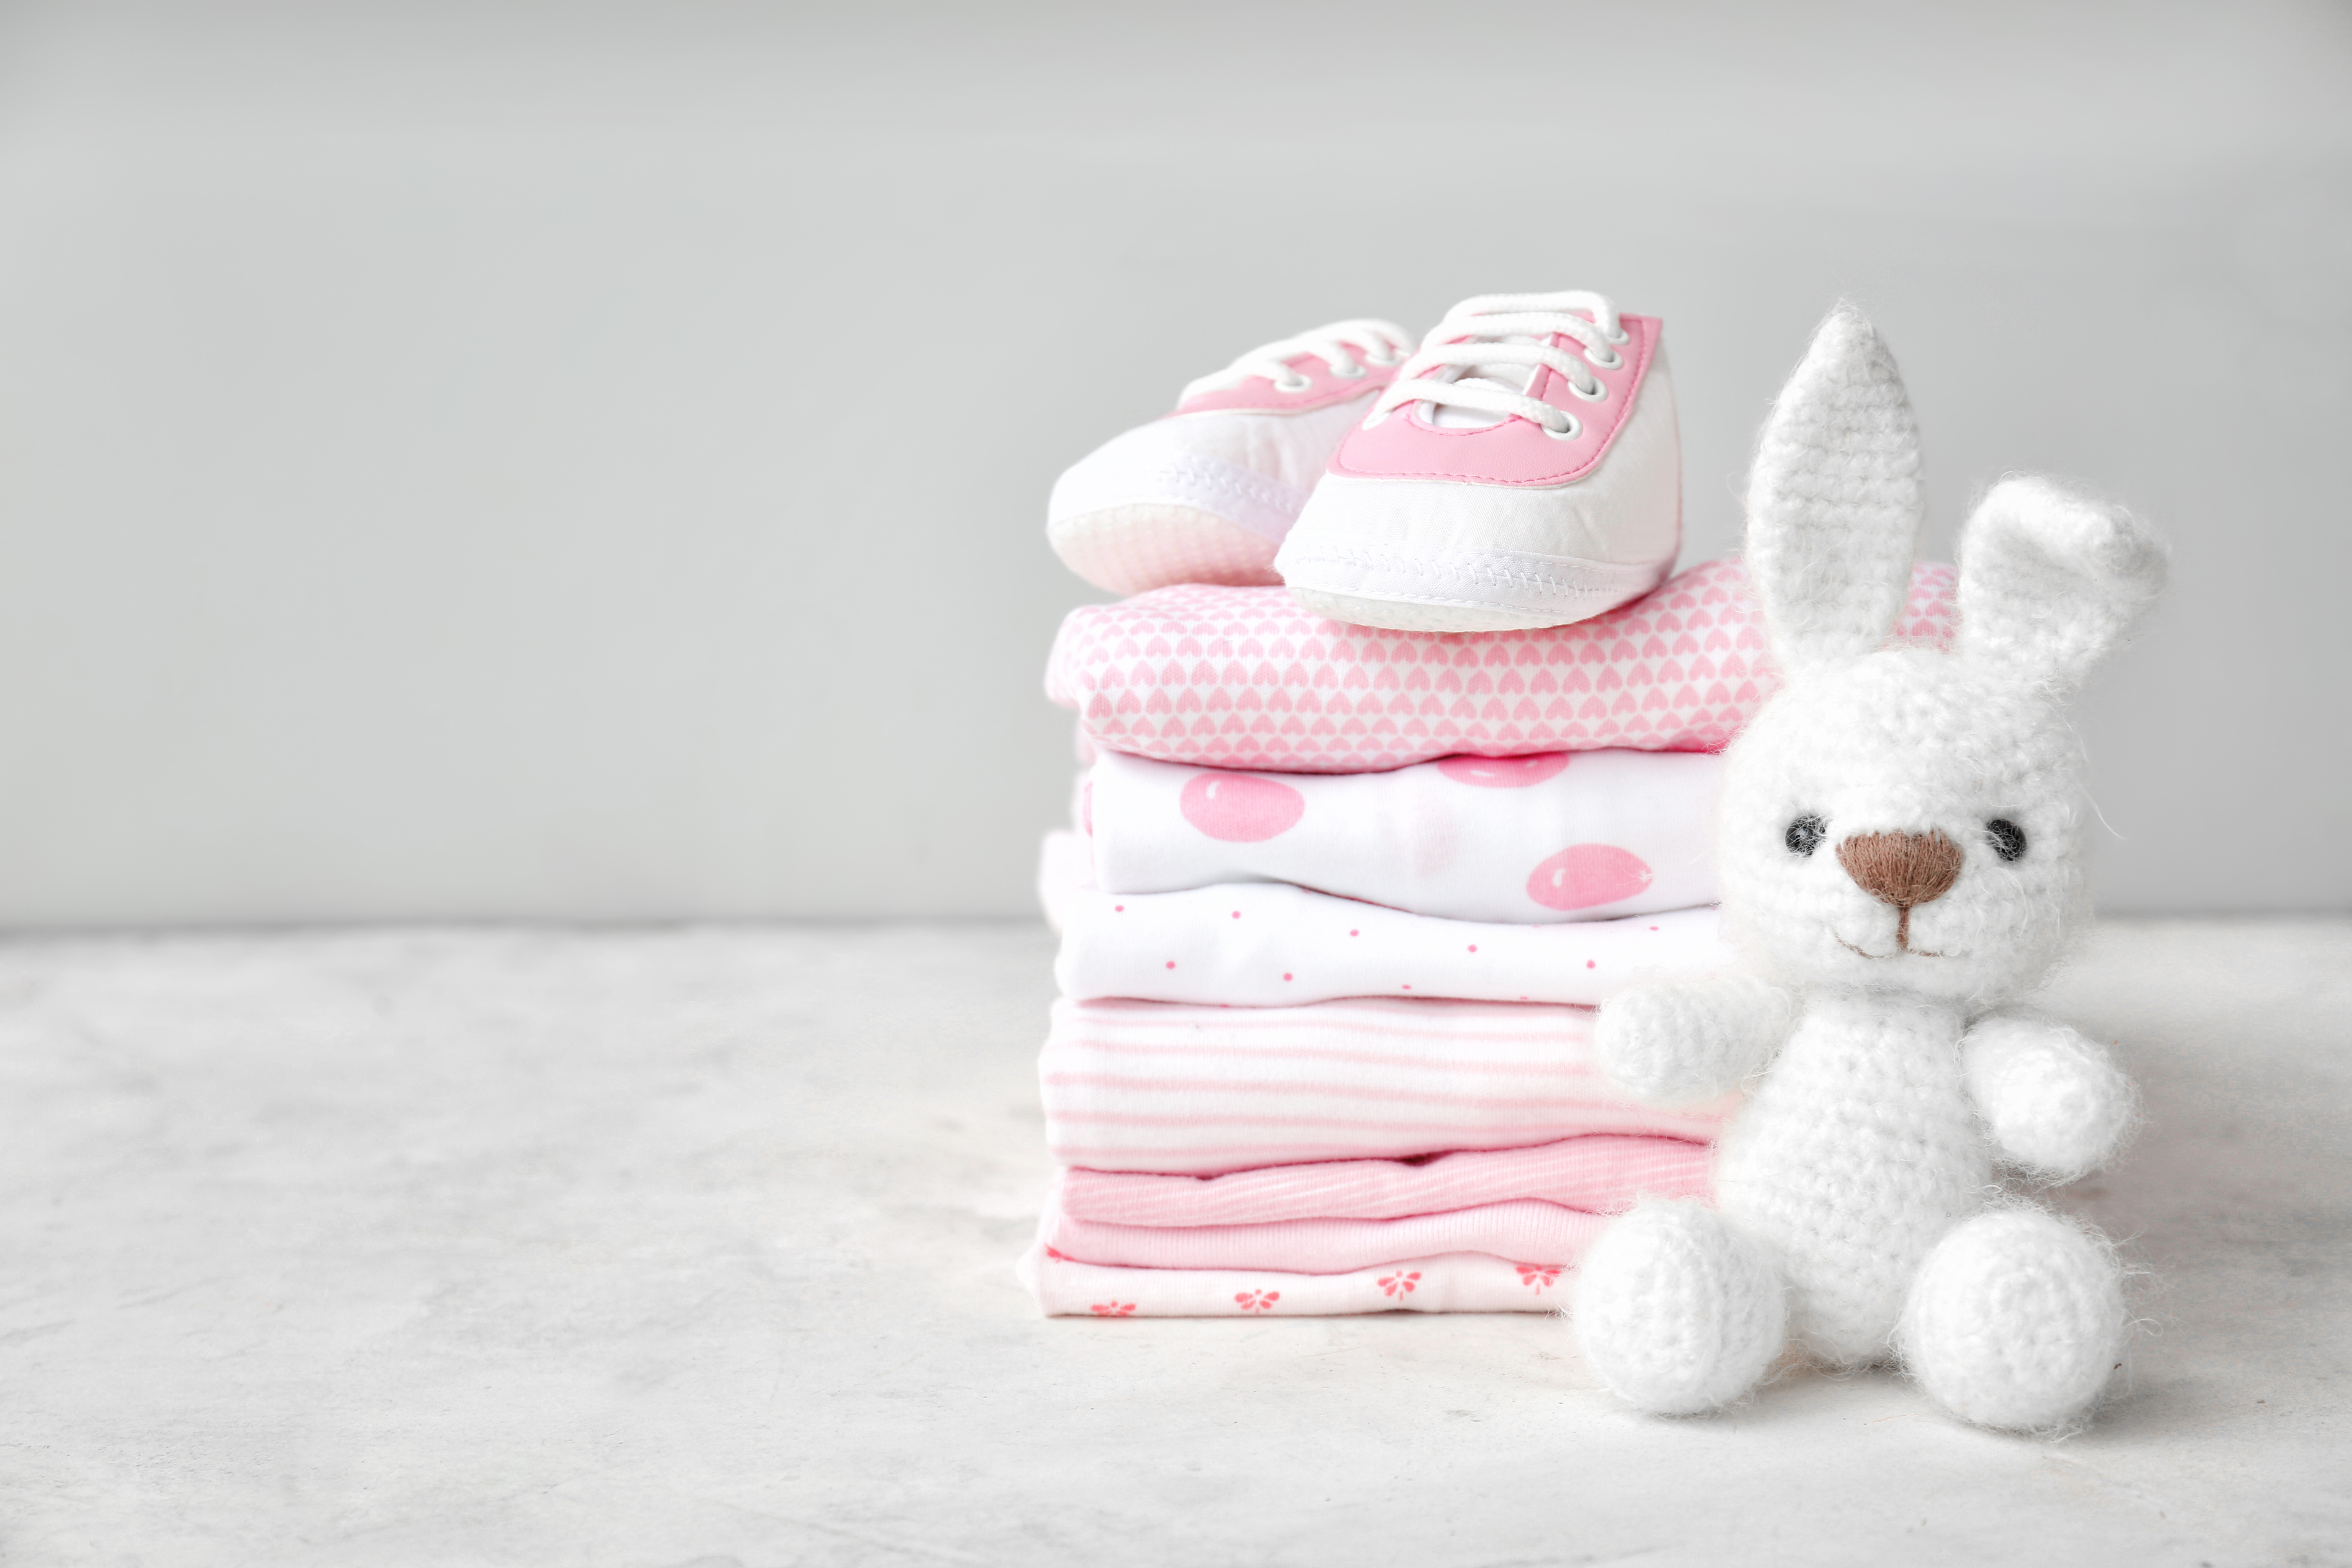 A stack of baby clothes, shoes, and a toy lying on a table | Source: Shutterstock